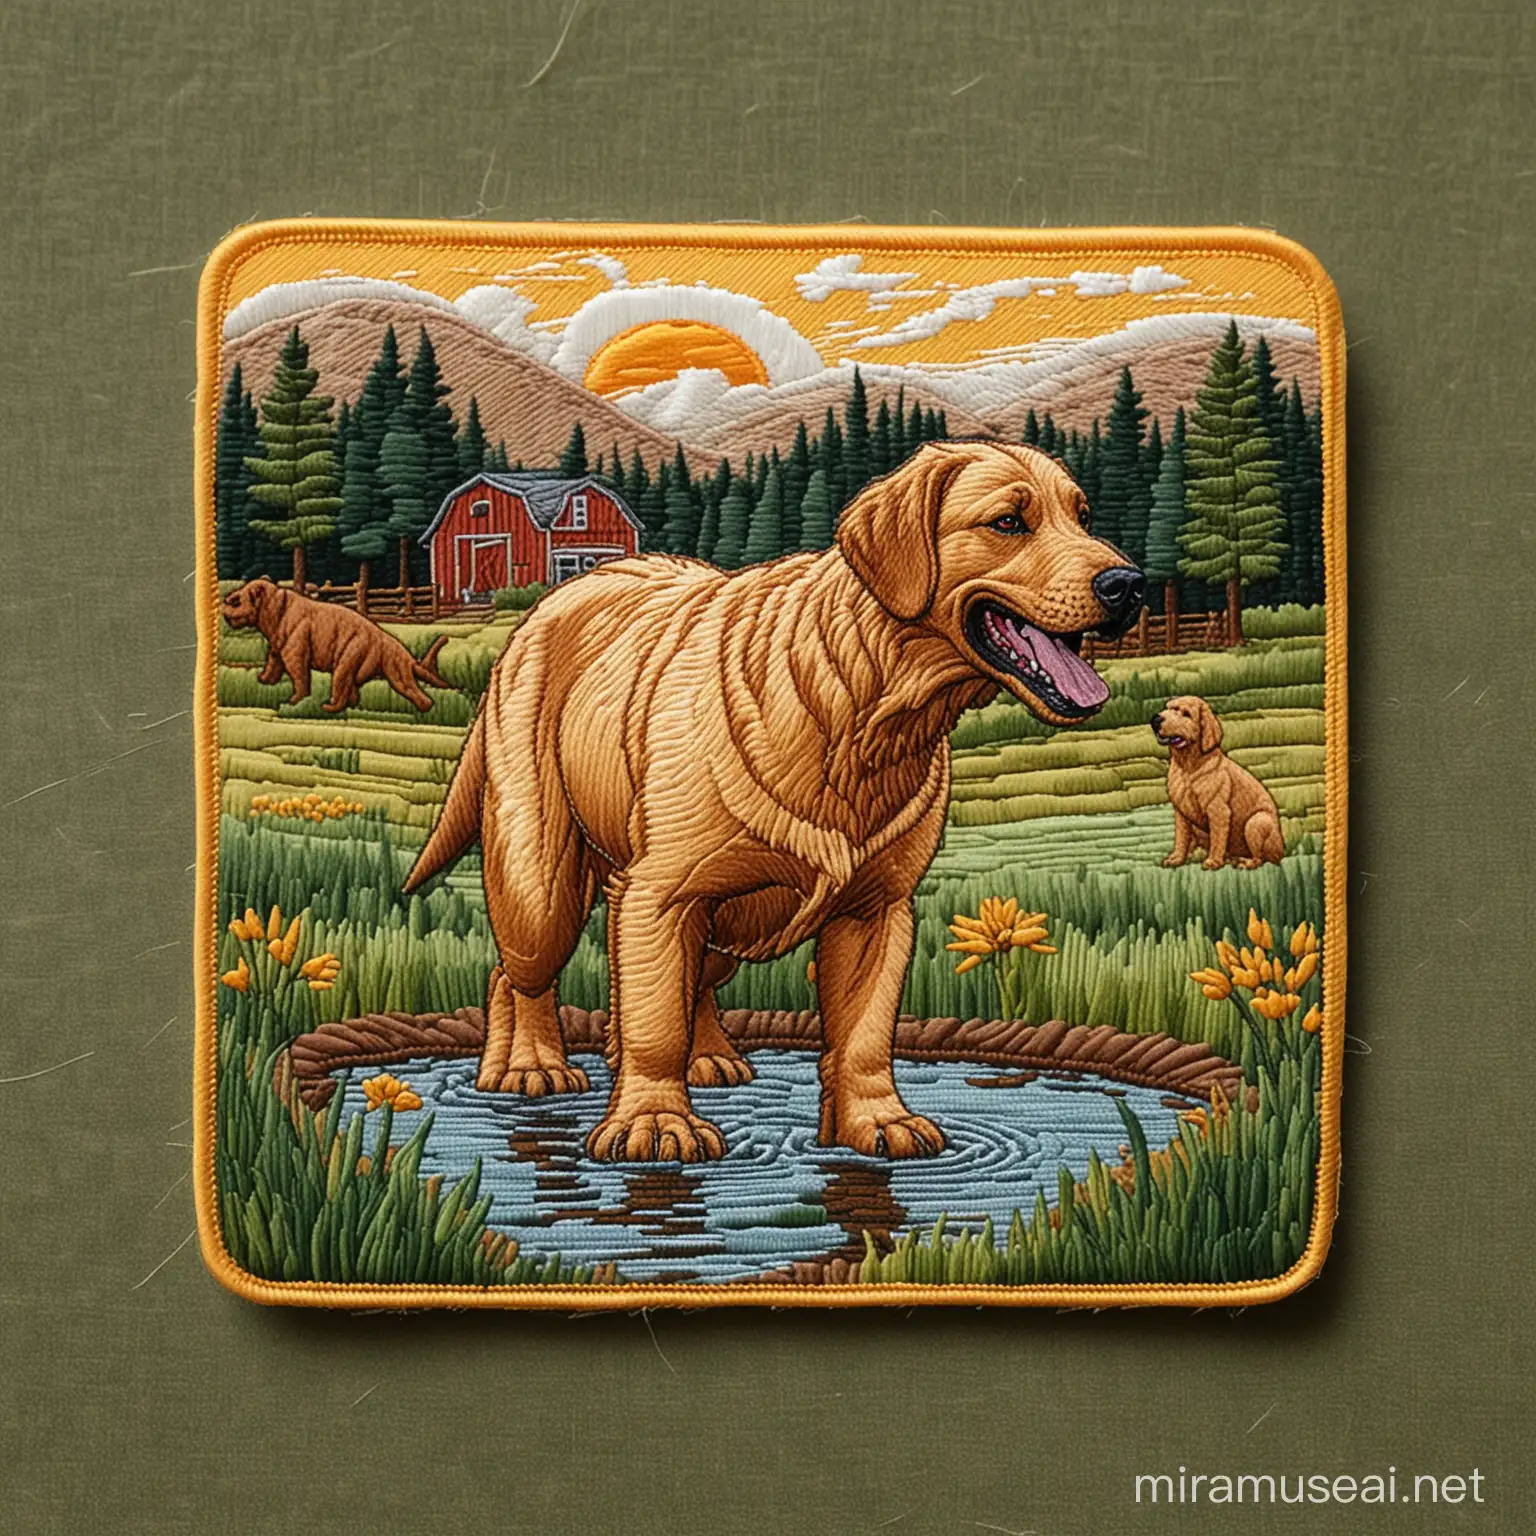 Square Embroidered Patch of Tyrannosaurus RexGolden Retriever Mix by Farm Pond